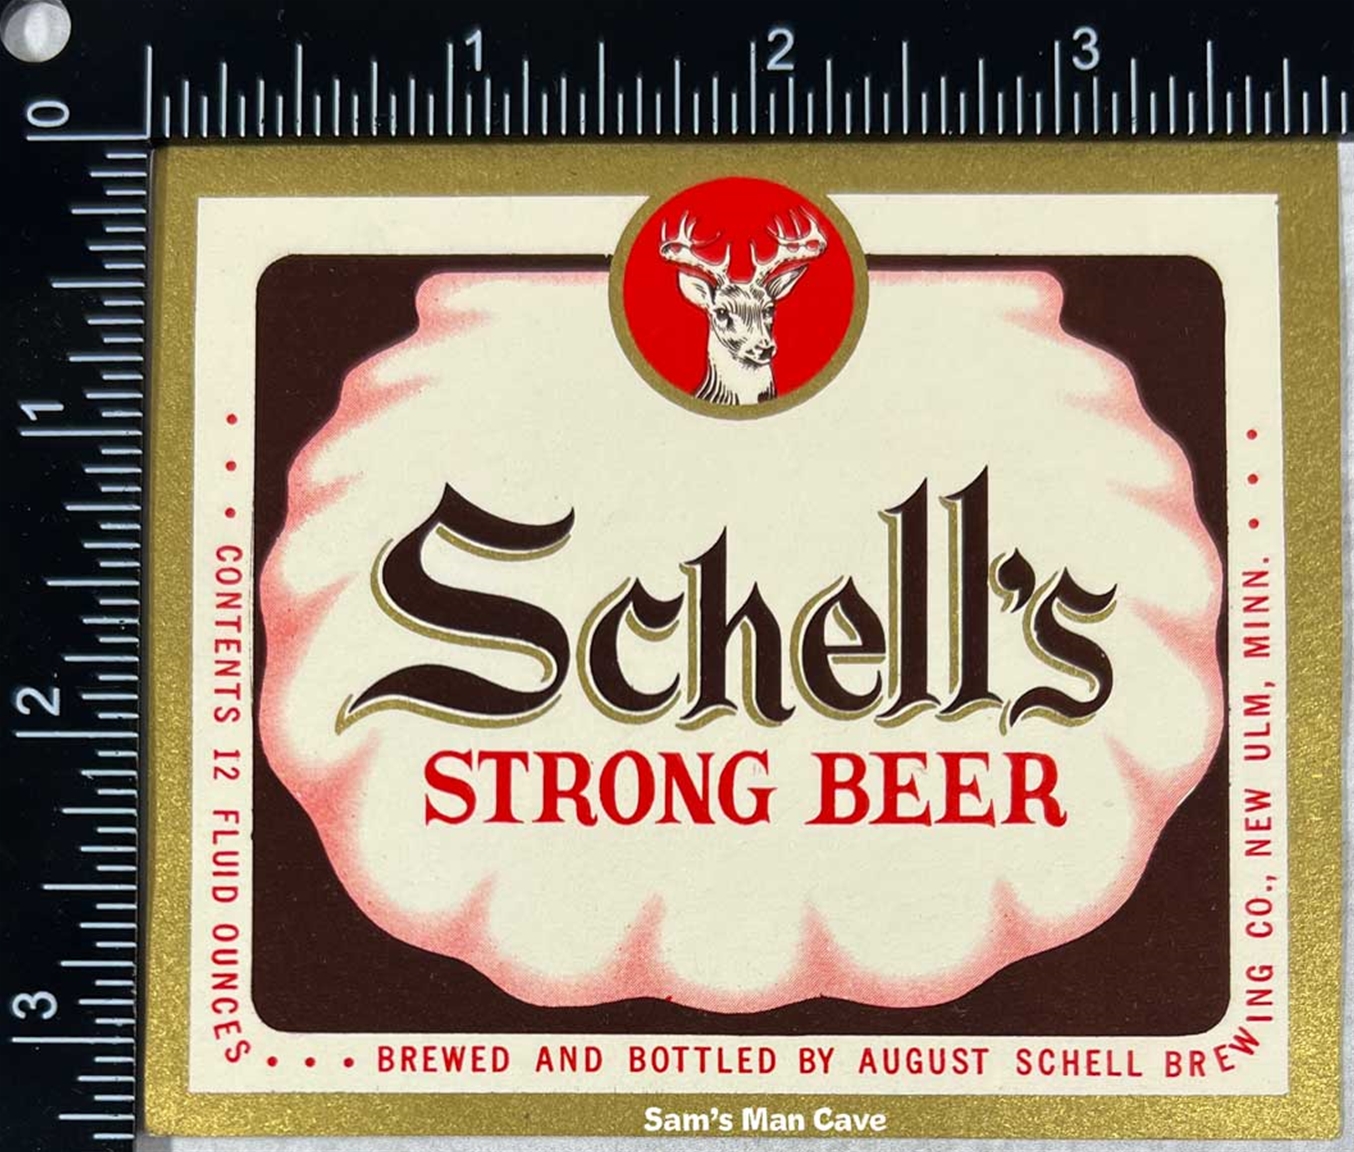 Schell's Strong Label